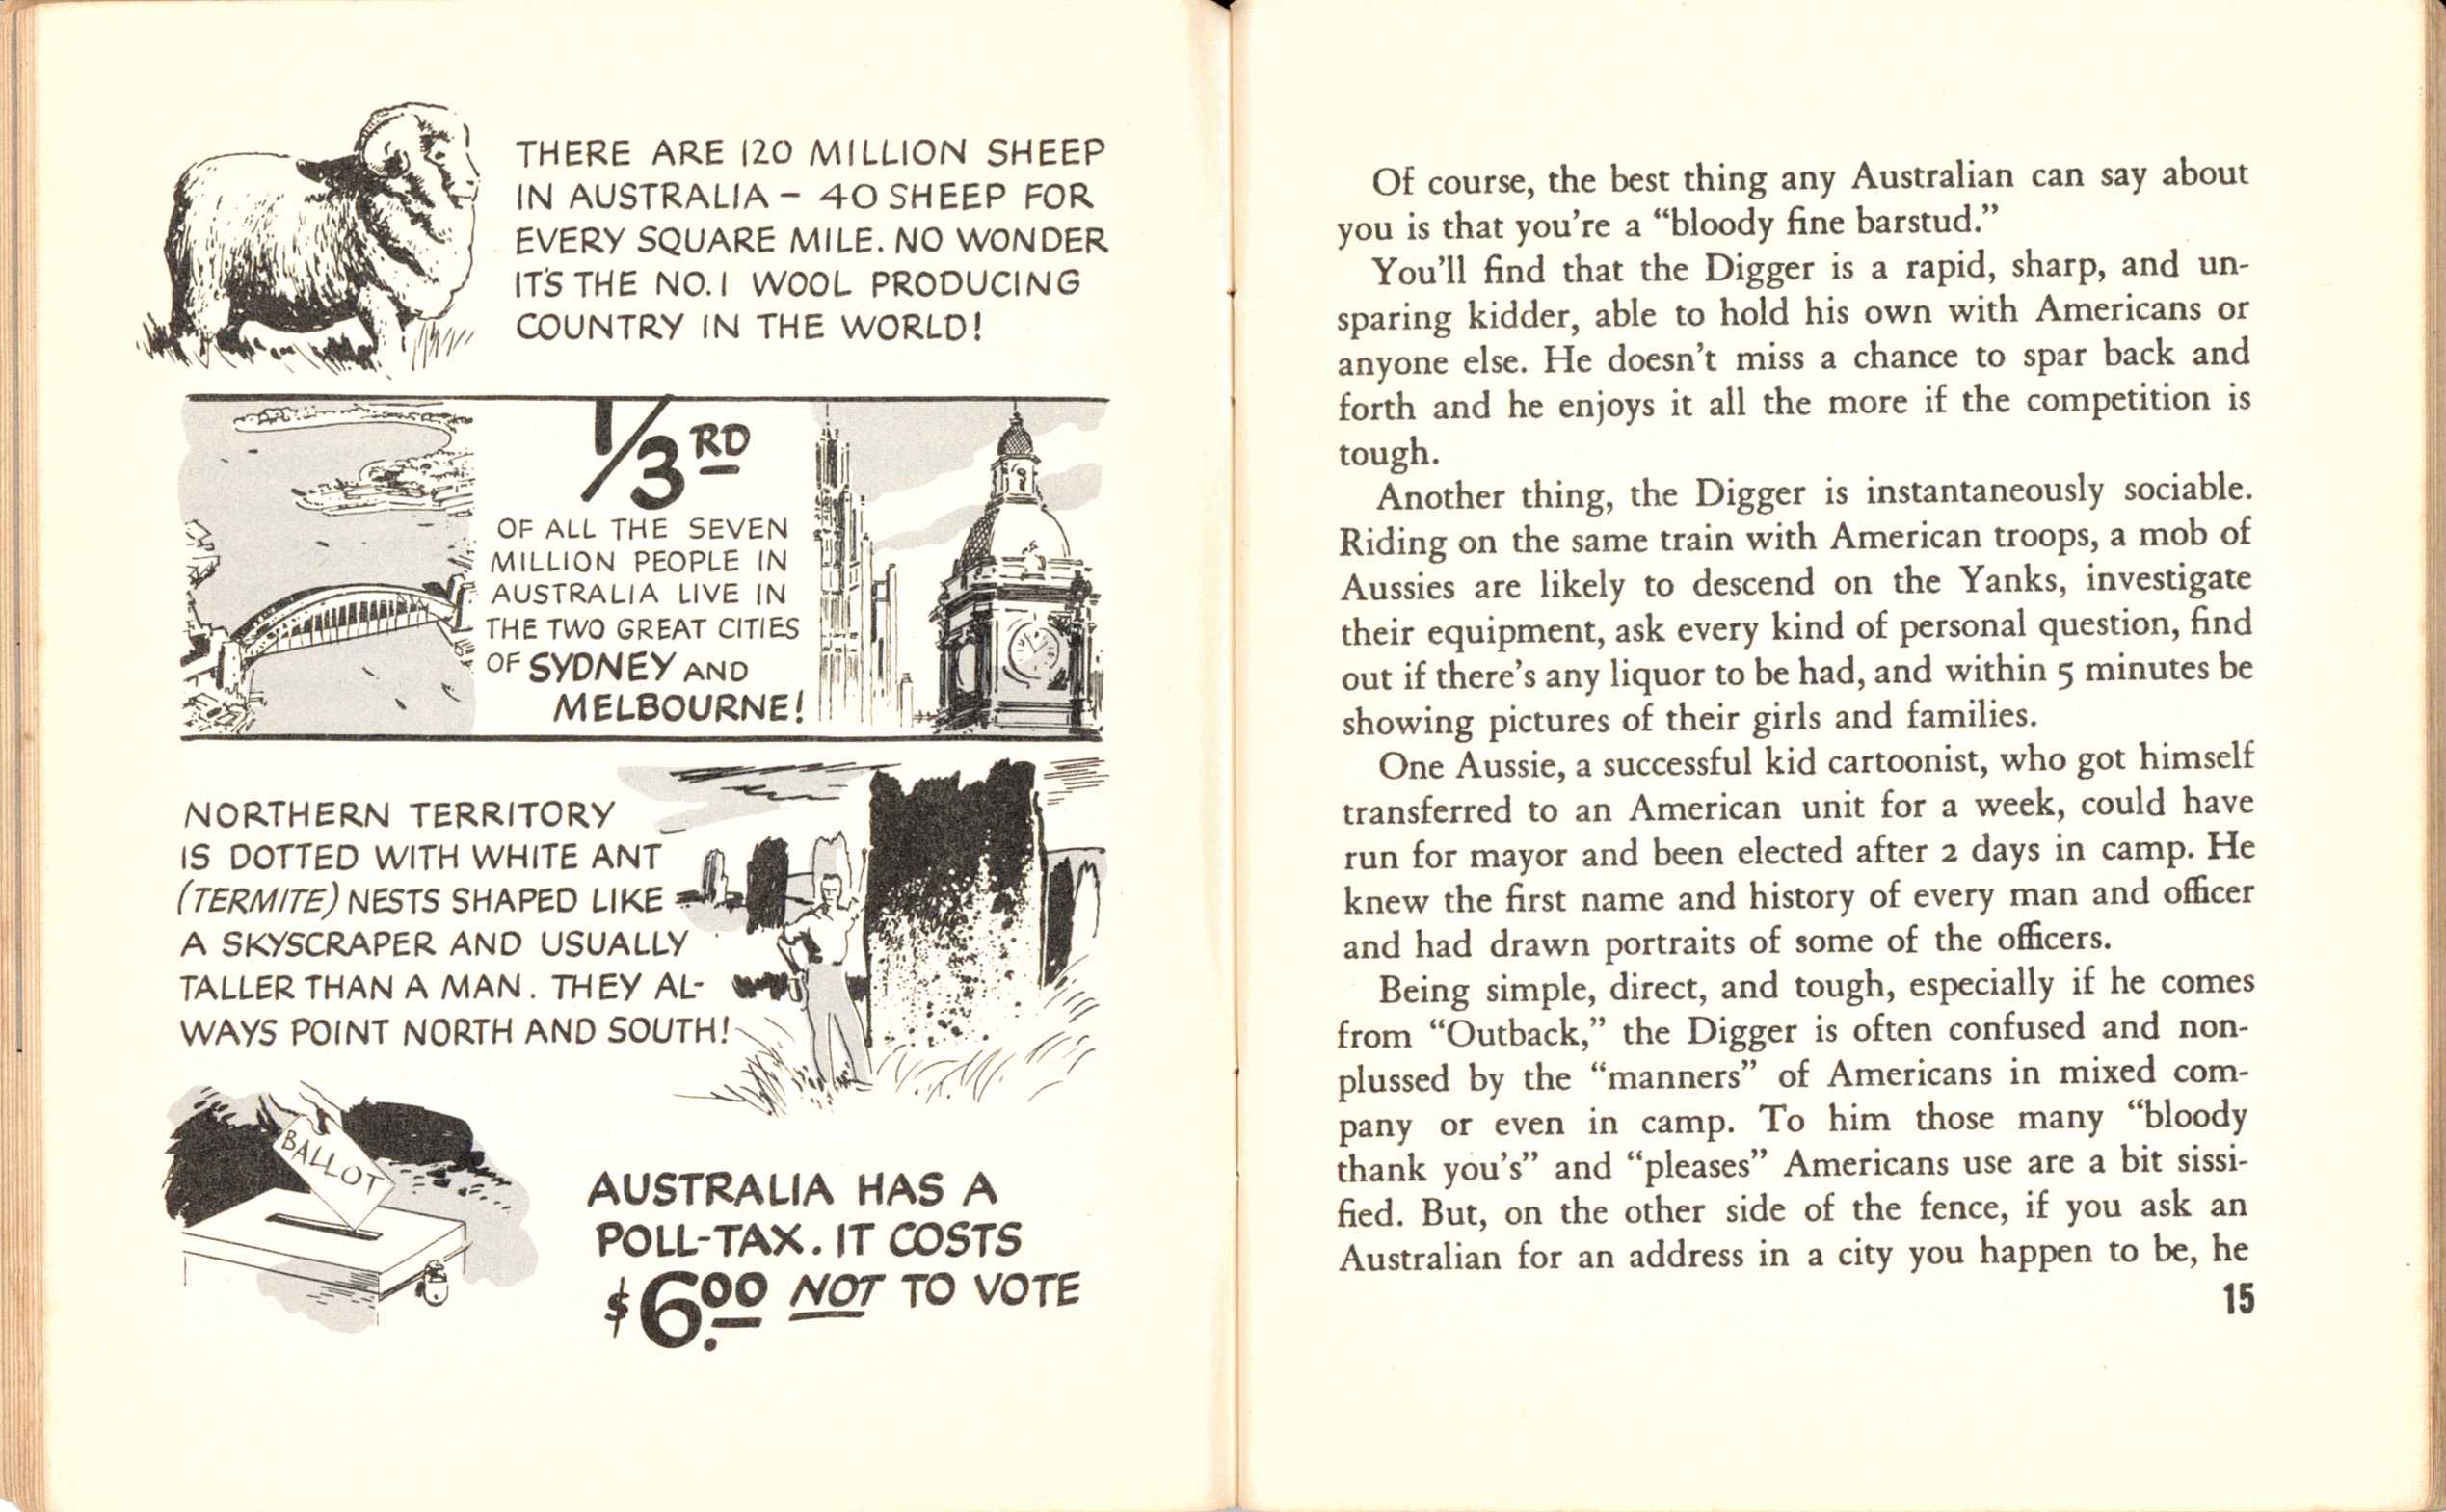 Pocket Guide to Australia page 15